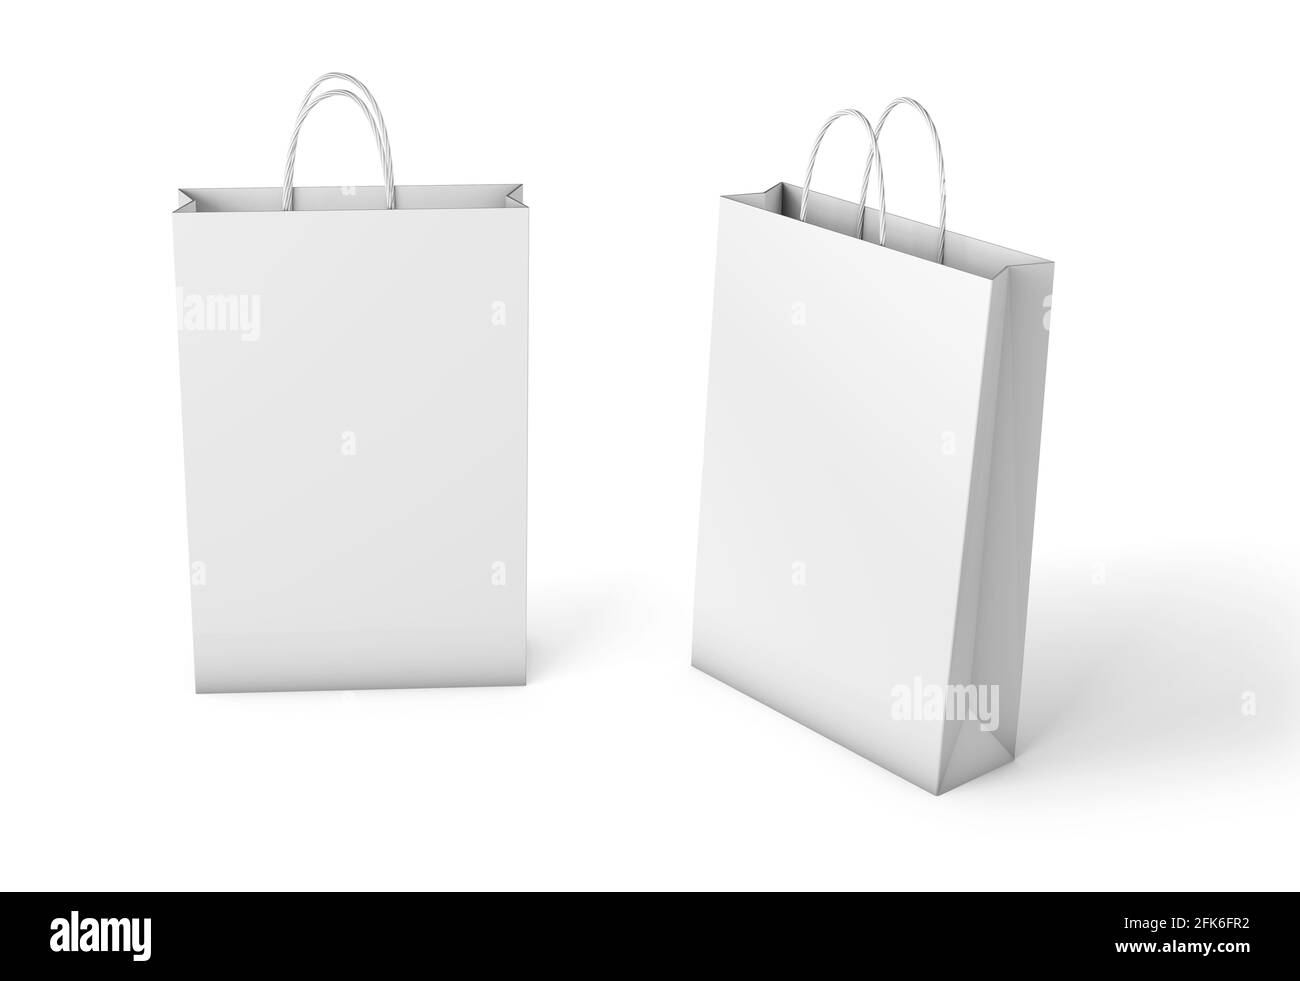 Bag Black And White Stock Photos Images Alamy